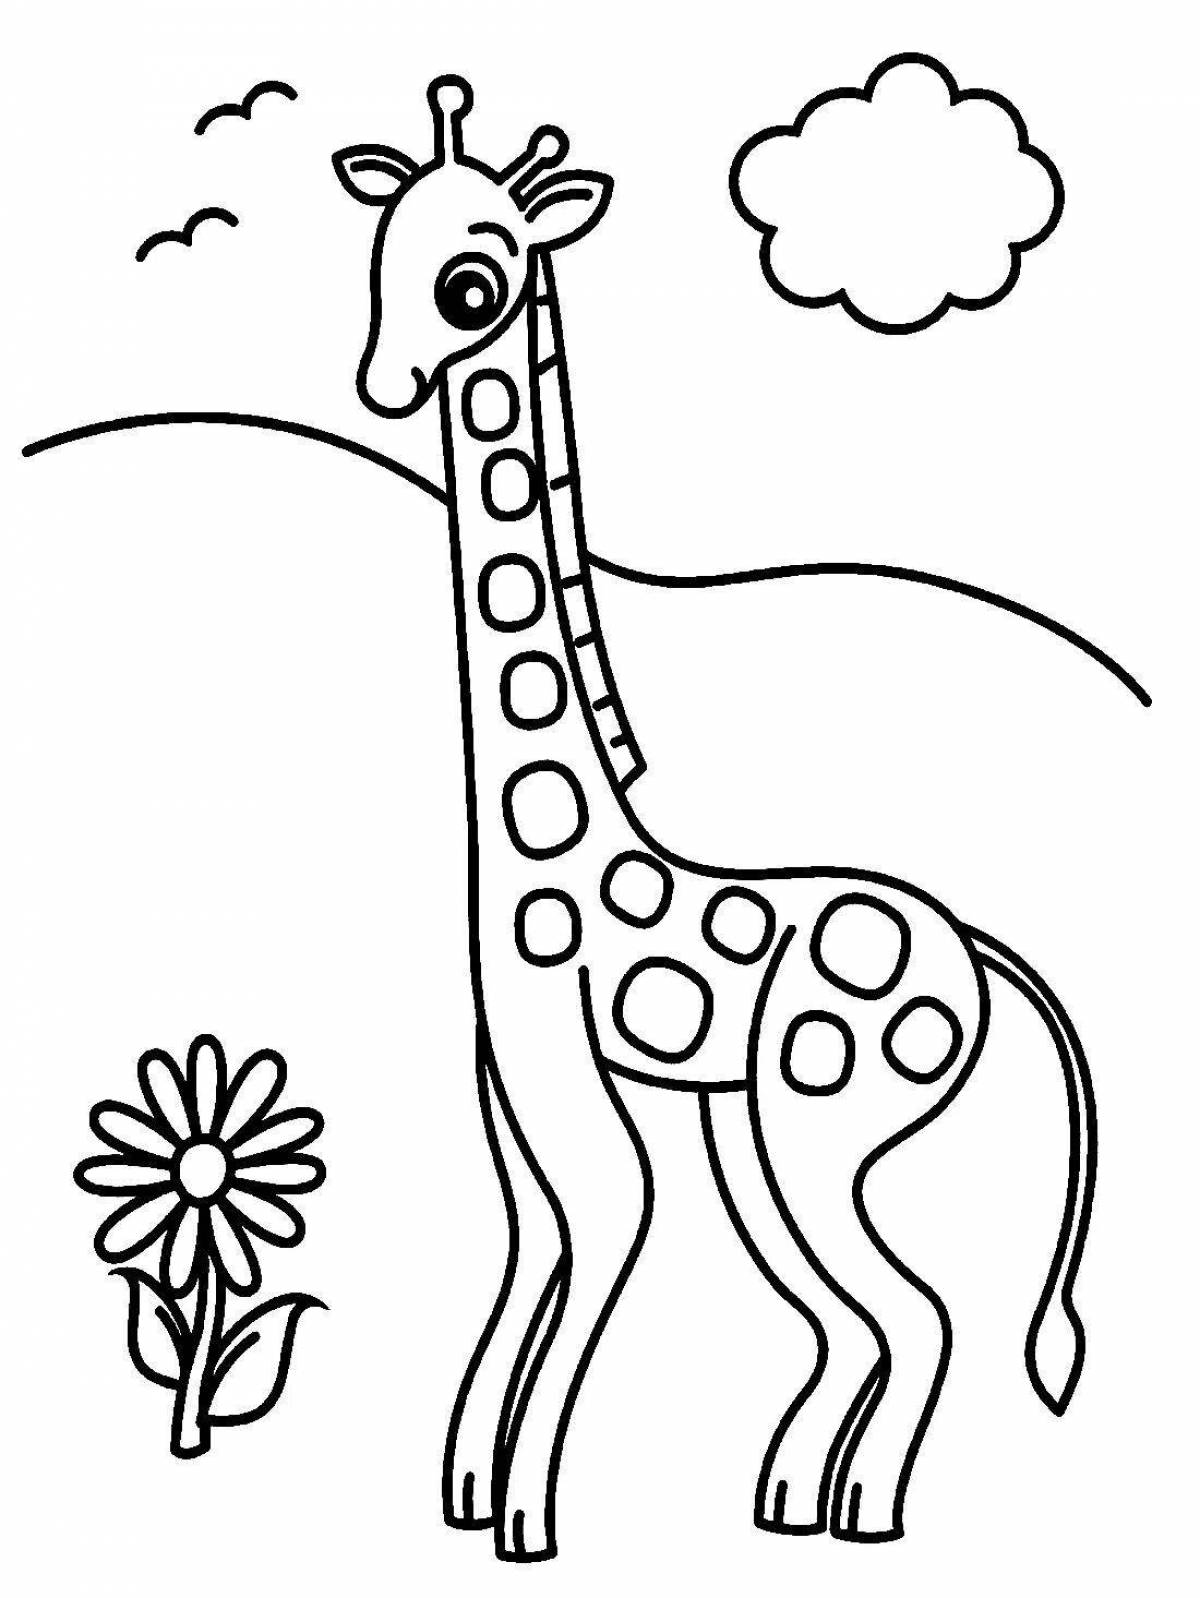 Coloring pages animals of hot countries for children 3-4 years old